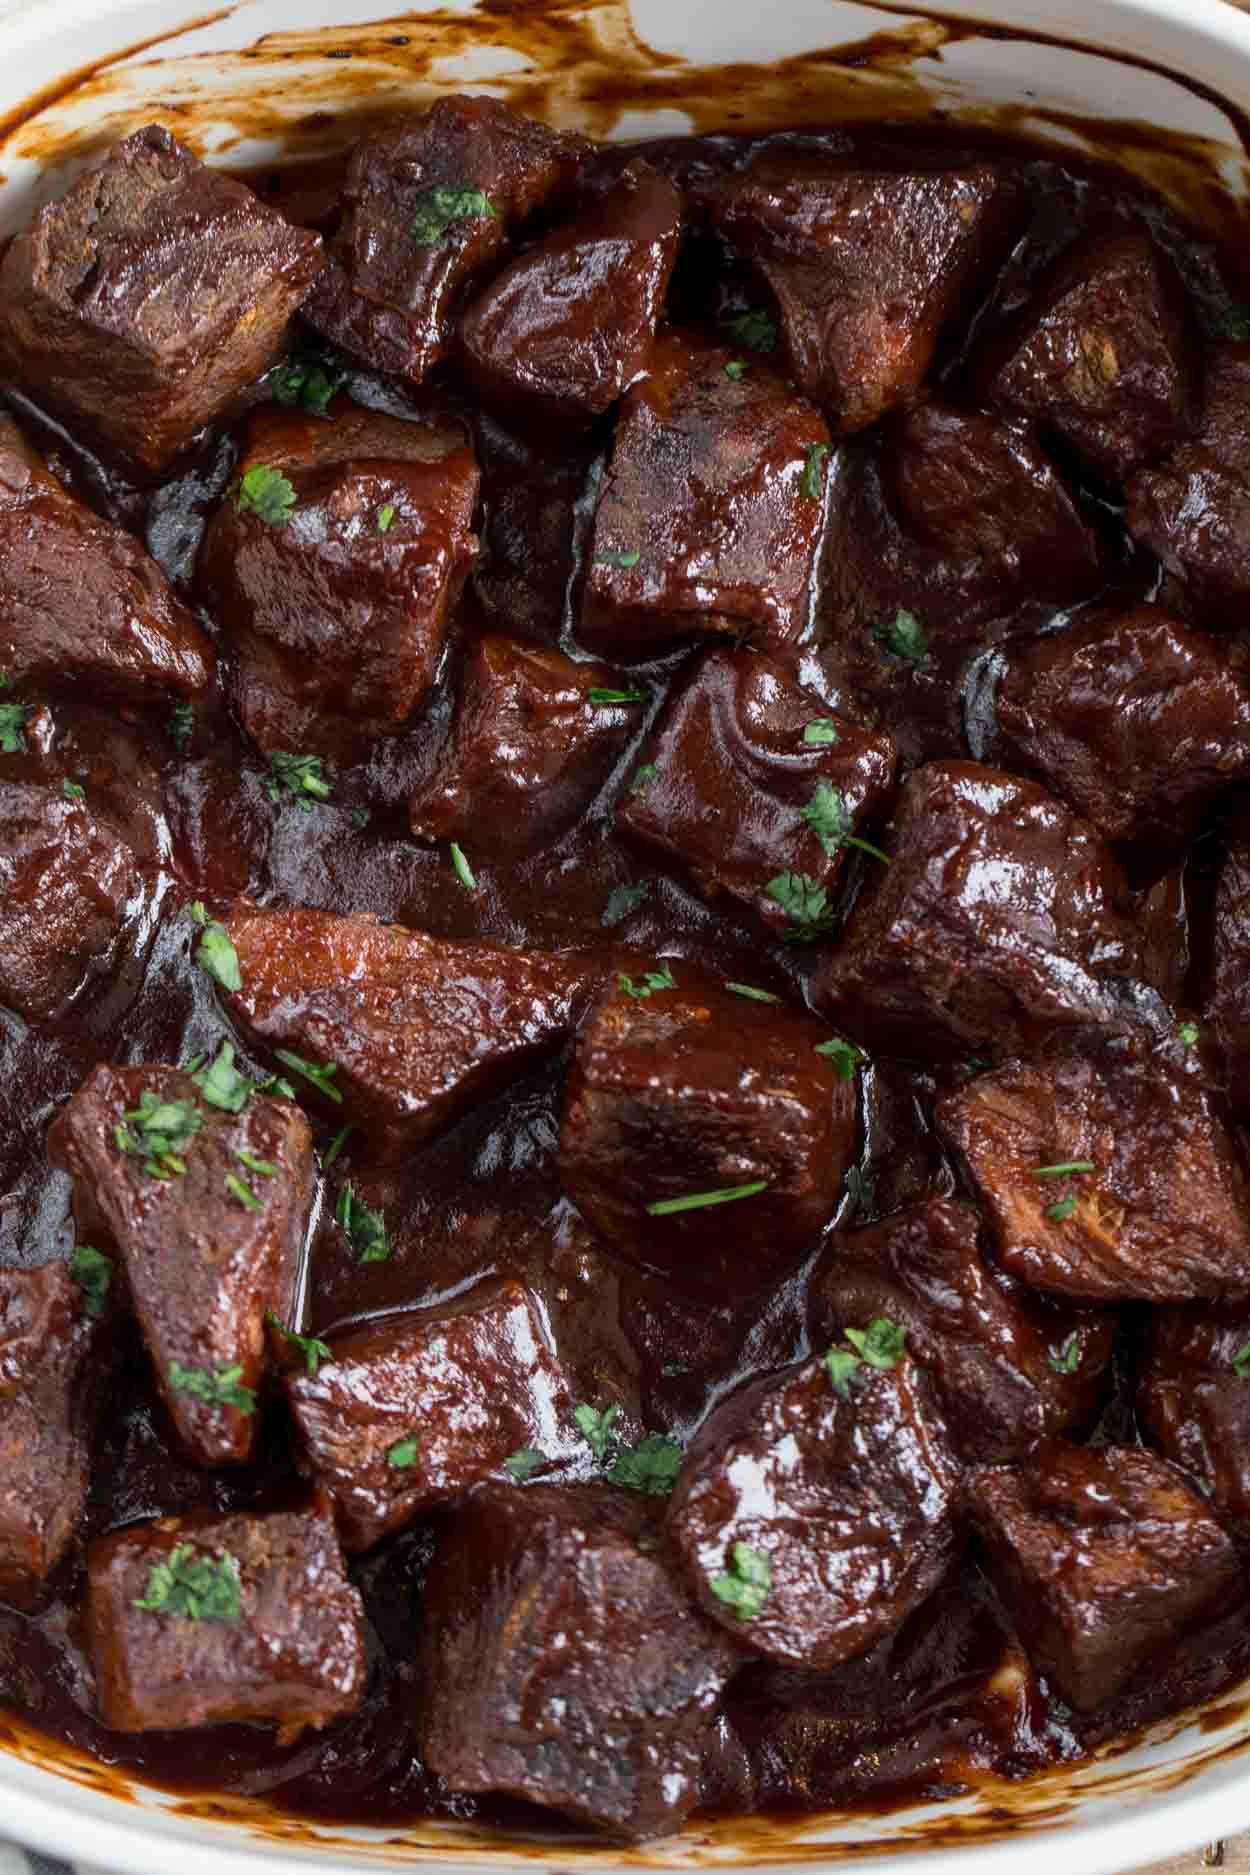 Meat chunks in a barbecue sauce topped with fresh greens.